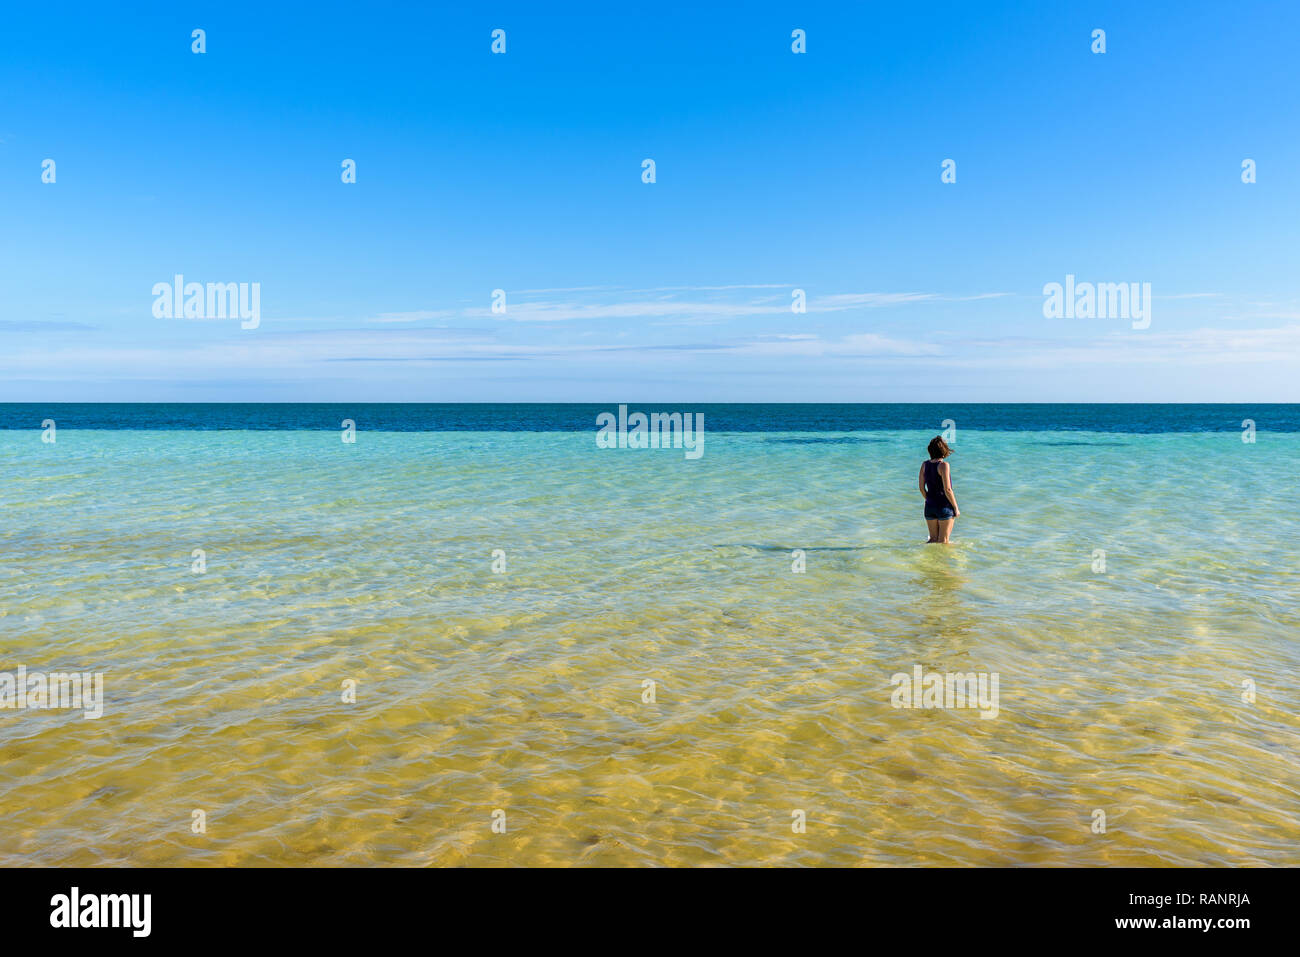 Young attractive woman in shorts standing on the sea shore of a tropical beach. Beautiful turquoise ocean water. Bahia Honda State Park, Florida Keys Stock Photo